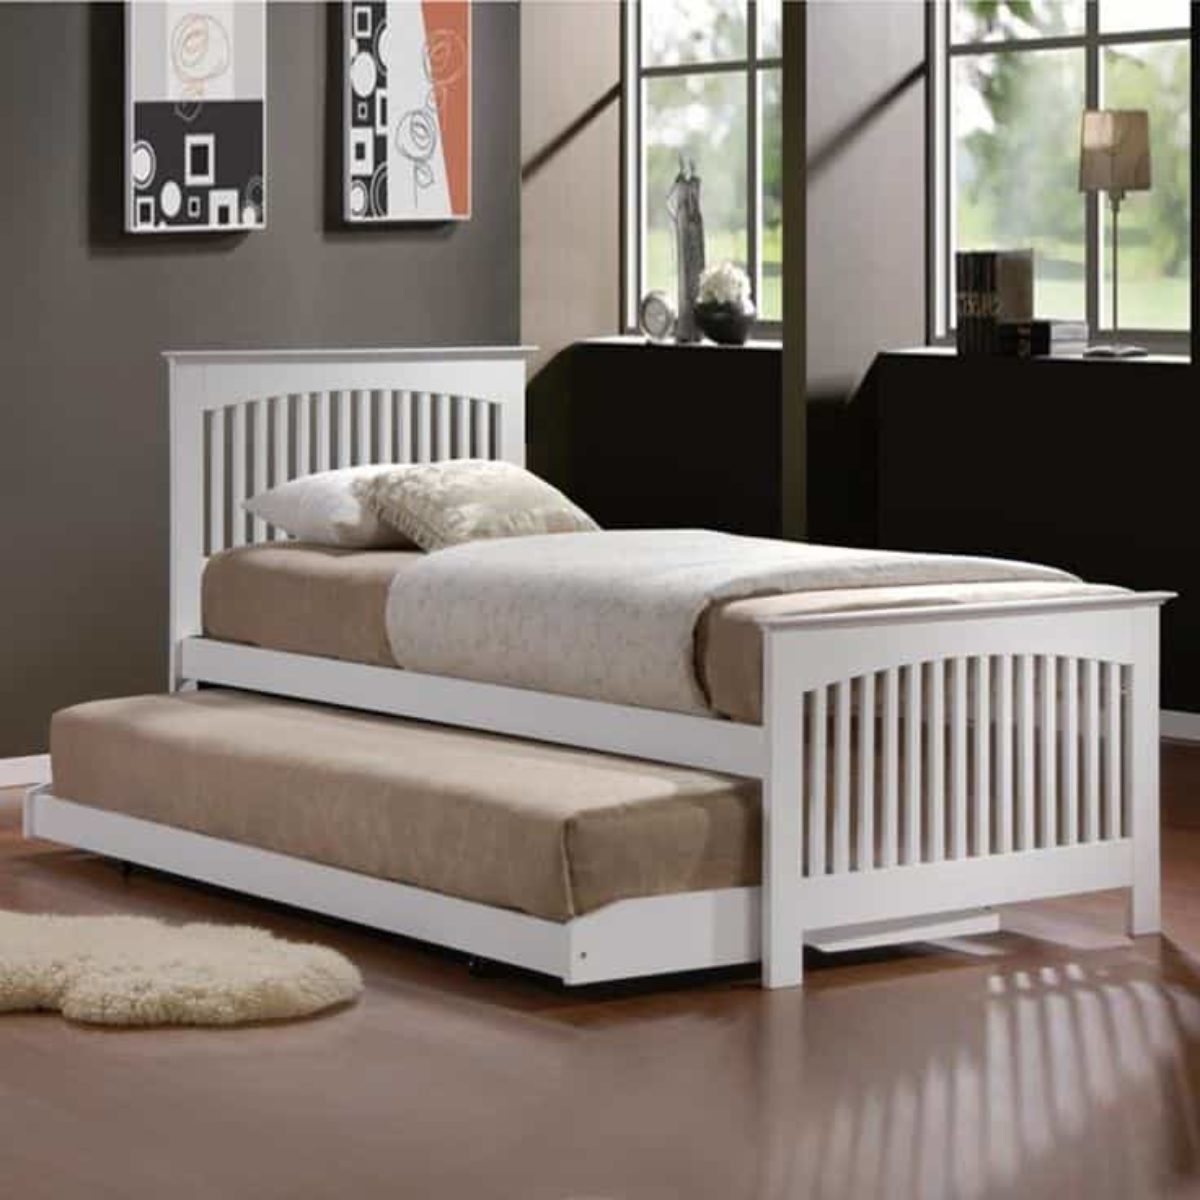 What Is A Trundle Bed, Will A Trundle Fit Under Twin Bed